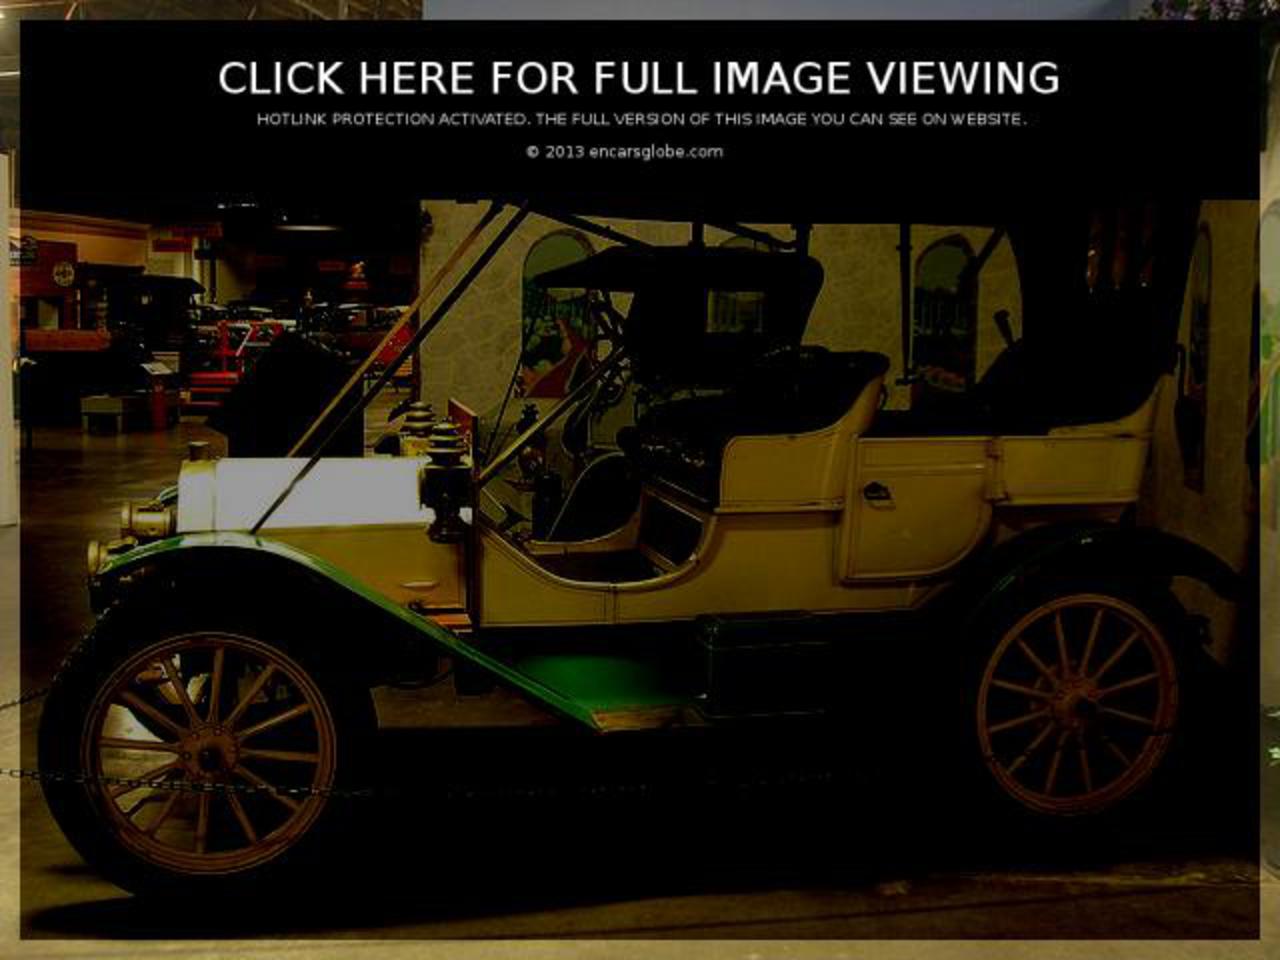 CarterCar Model H Tourer Photo Gallery: Photo #04 out of 10, Image ...